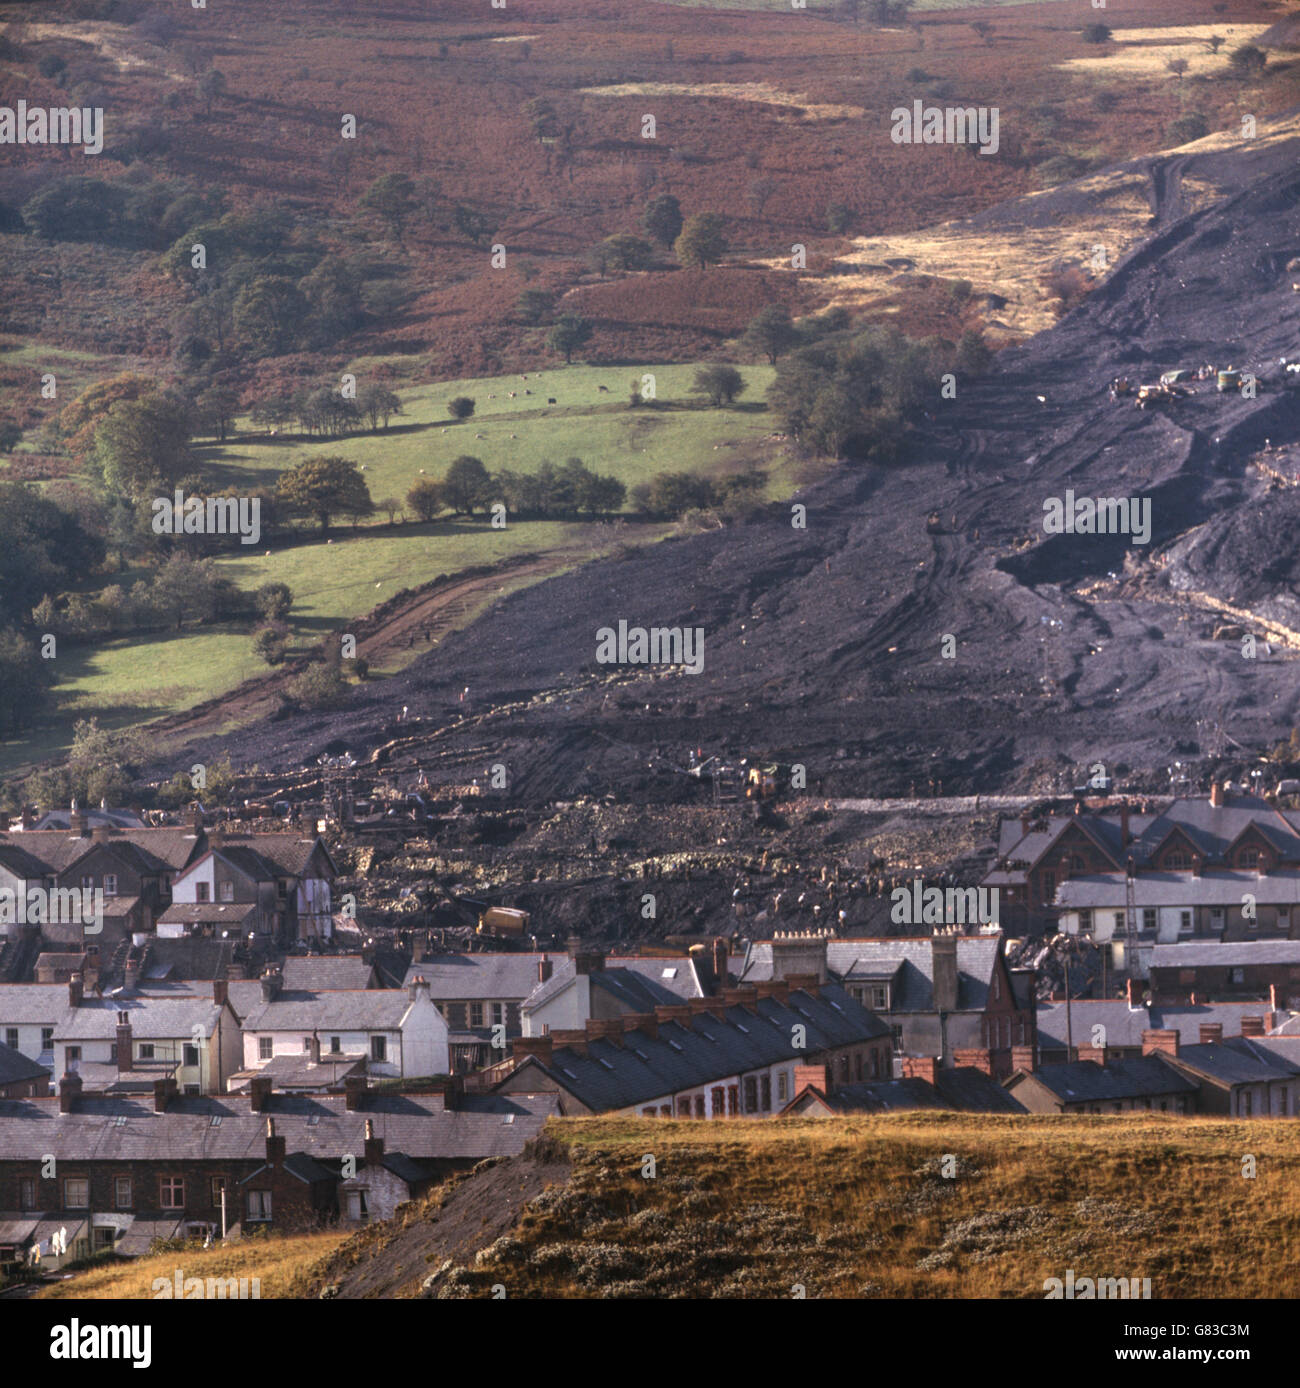 The moving mountain of coal sludge after the disaster at Aberfan when the coal tip avalanched through the Pantglas Junior School, killing 116 children and 28 adults. Stock Photo